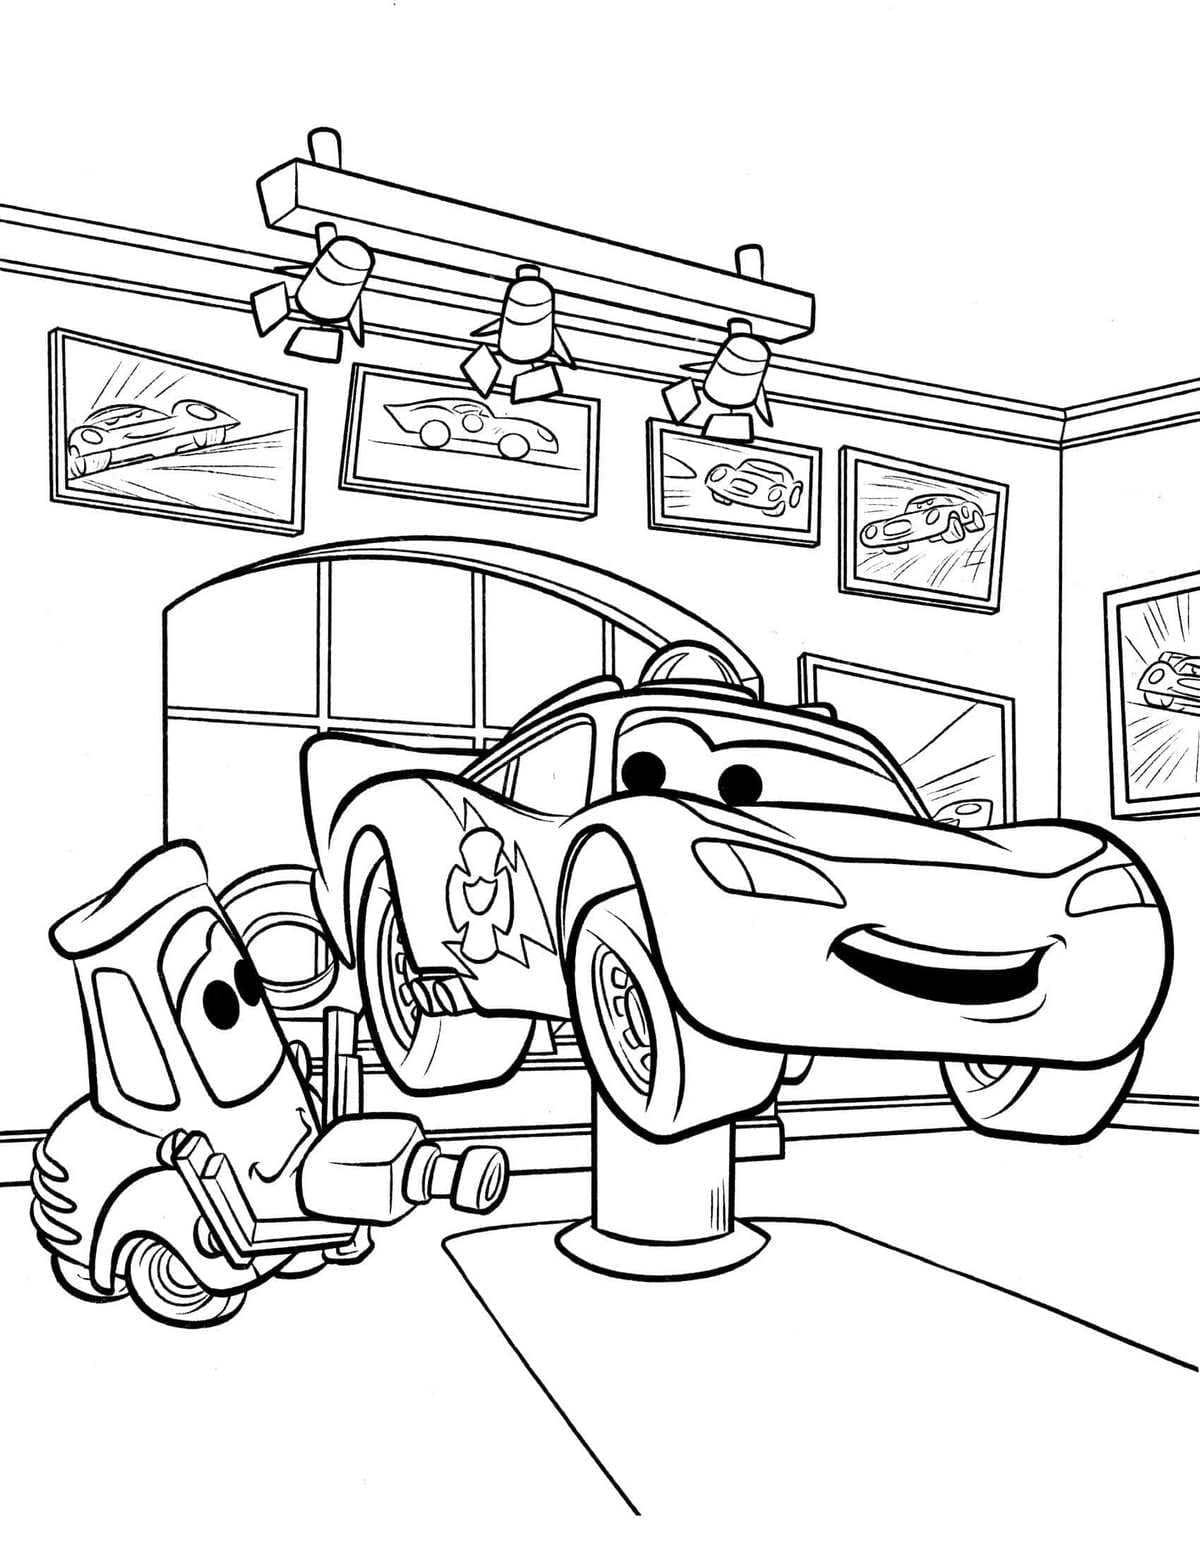 Lightning mcqueen repair coloring page